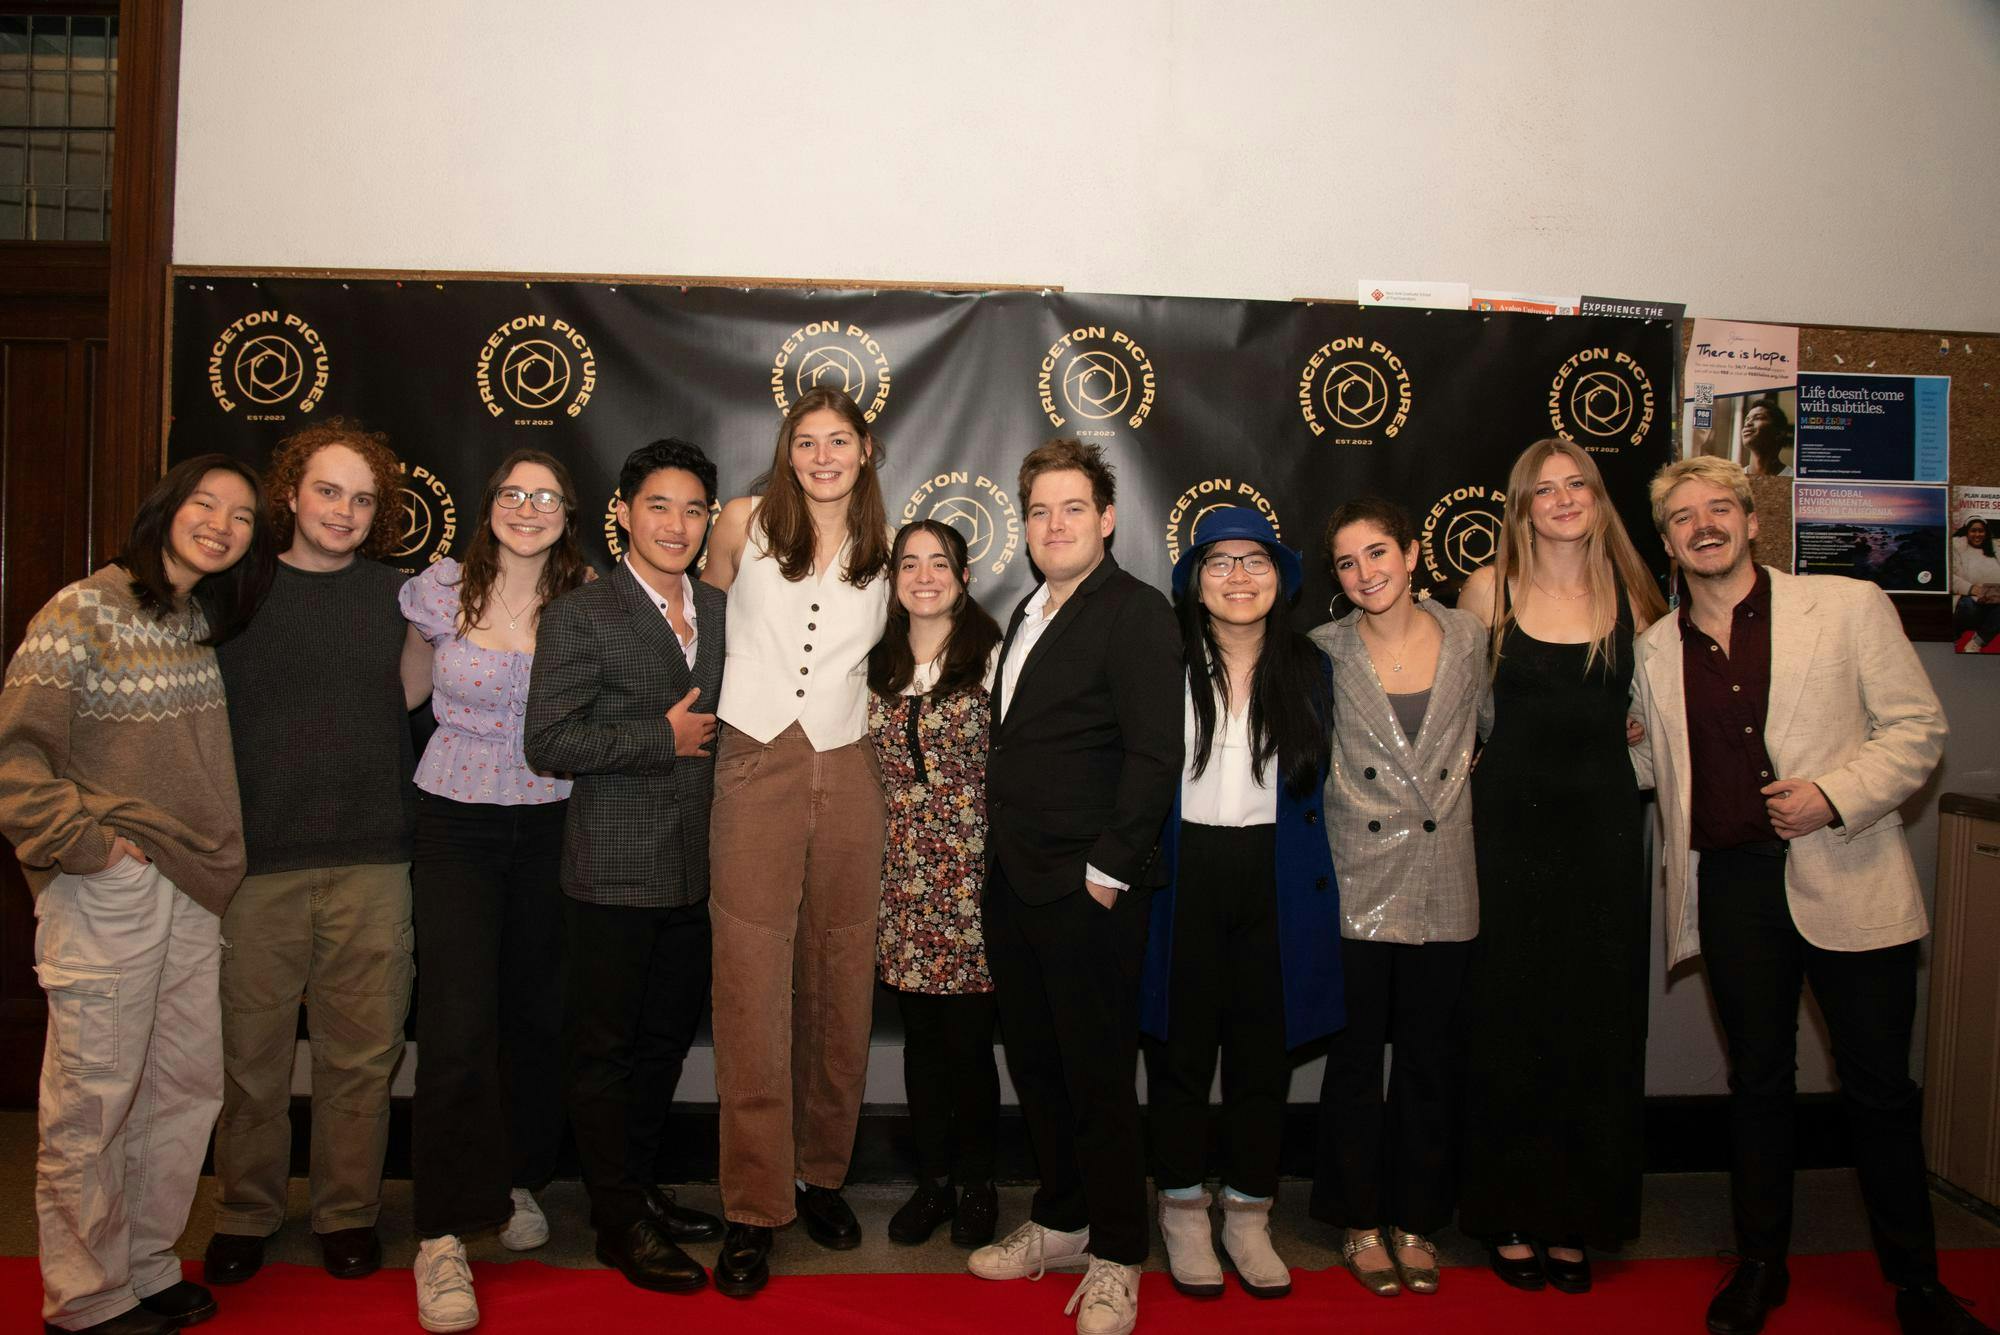 Eleven students pose in front of a black banner with a gold logo pattern. 